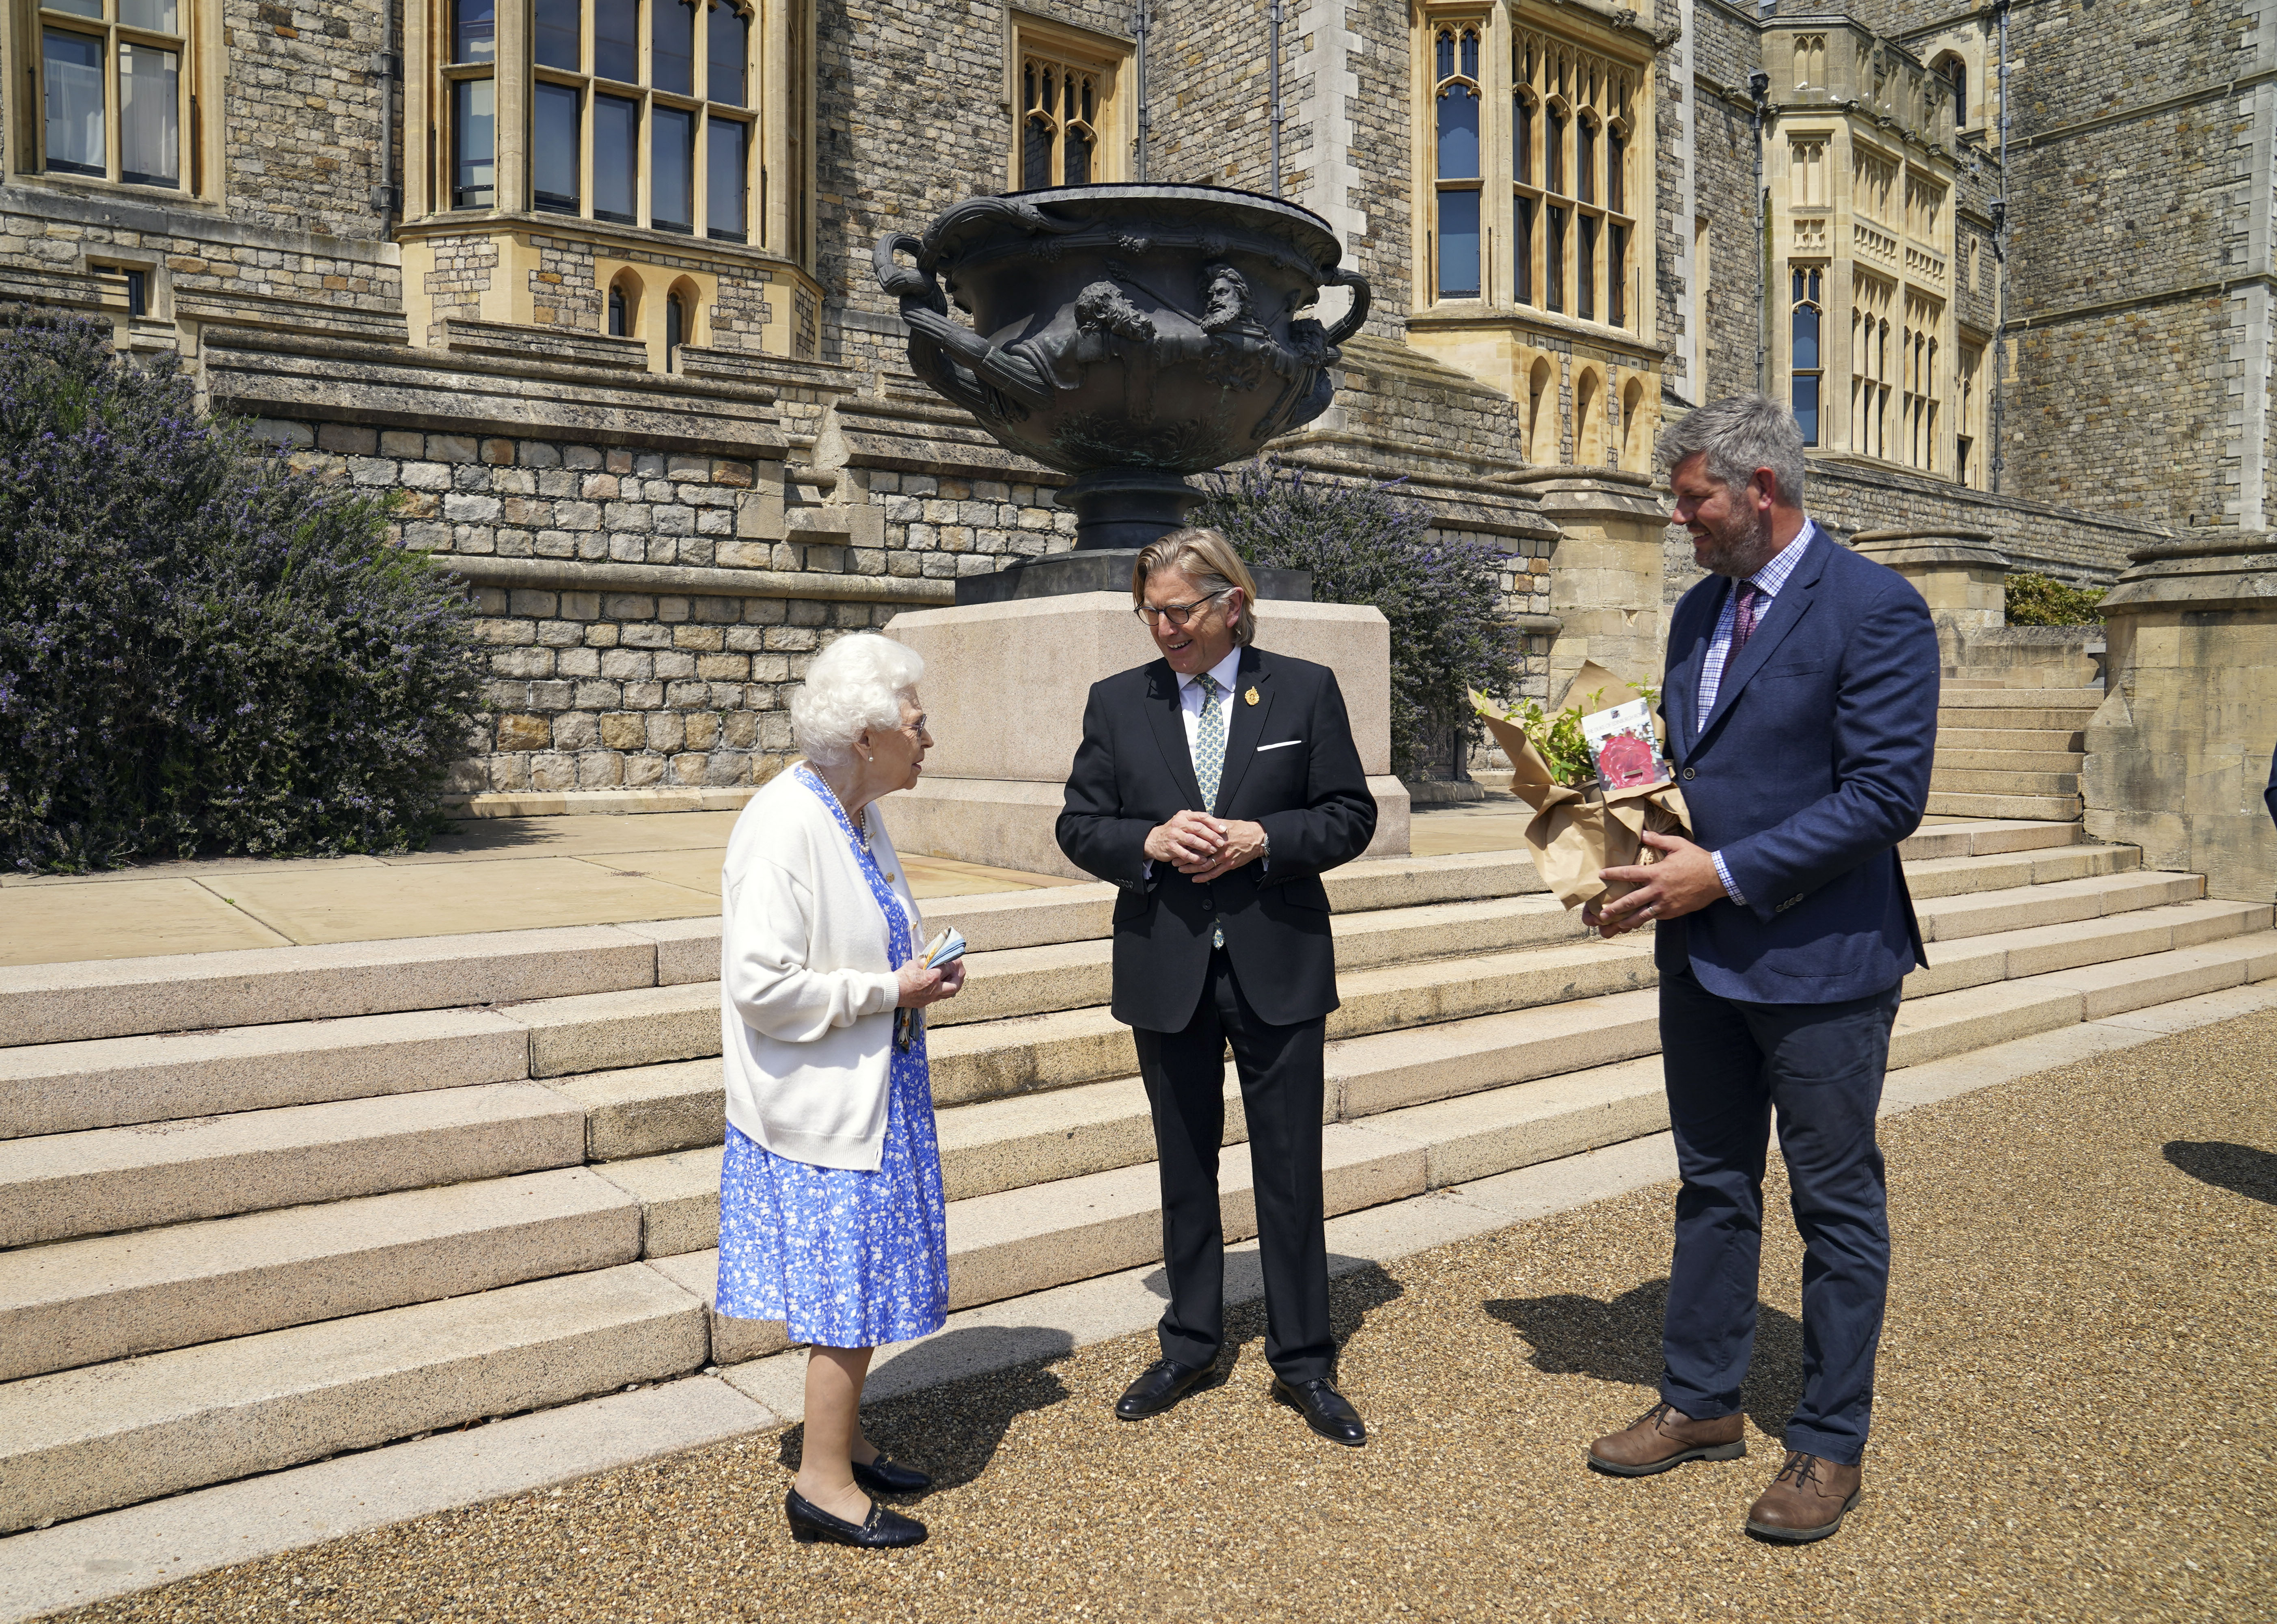 The Queen chatting about the gardens with the RHS president and Windsor's head gardener